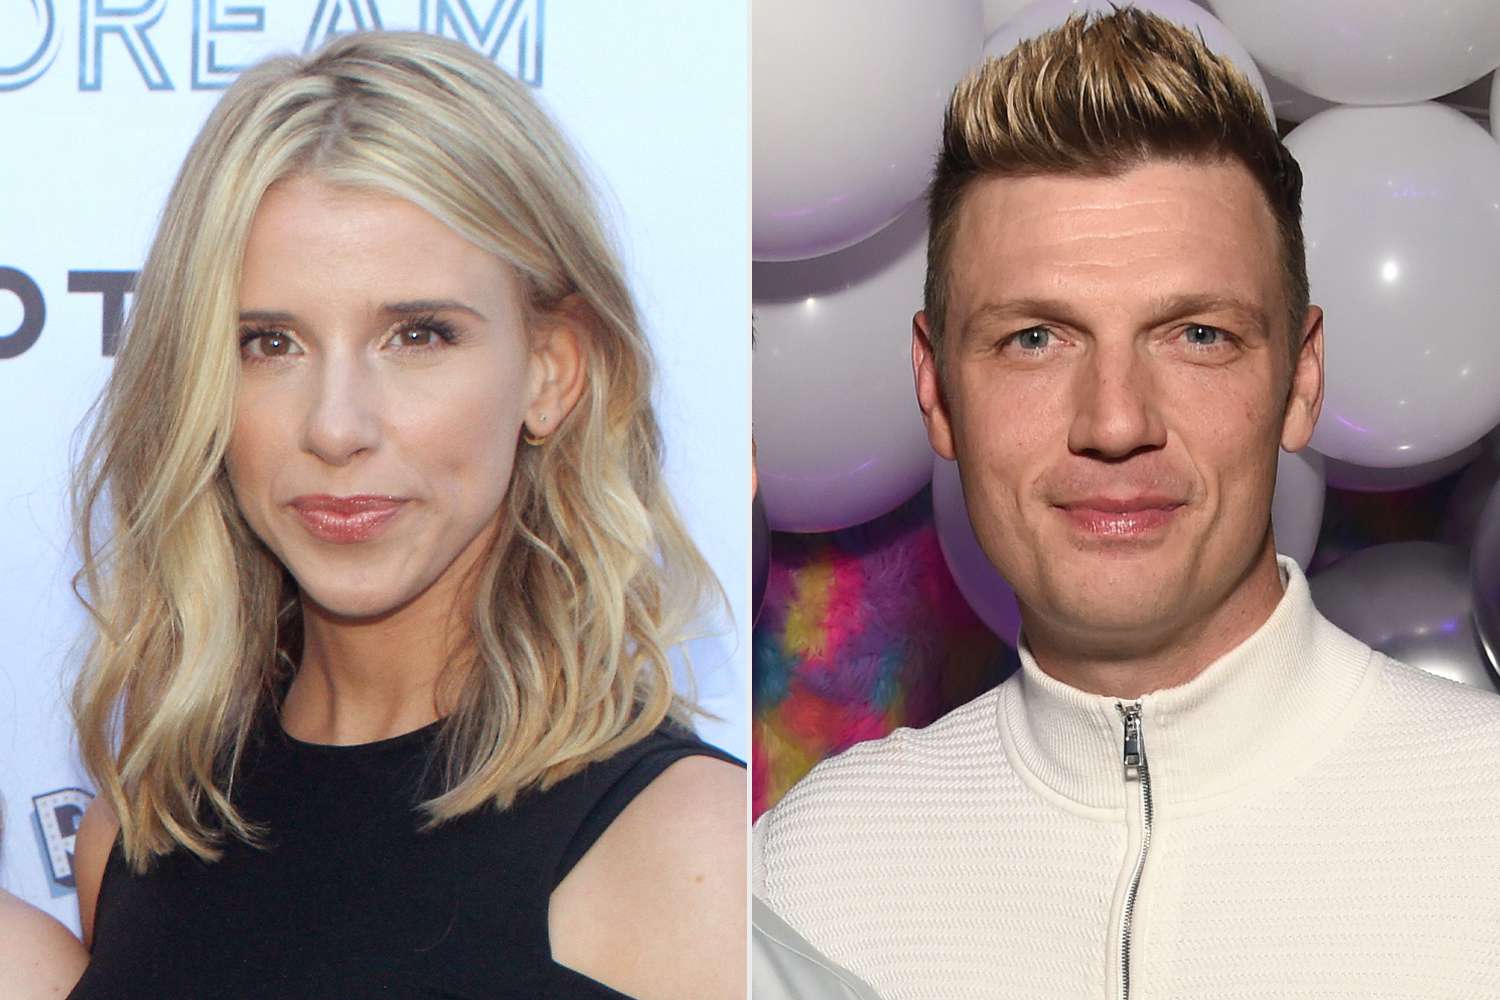 Melissa Schuman Reveals Why She Recorded a Duet with Nick Carter Months After Alleged Rape: 'Like an Alibi for Him'